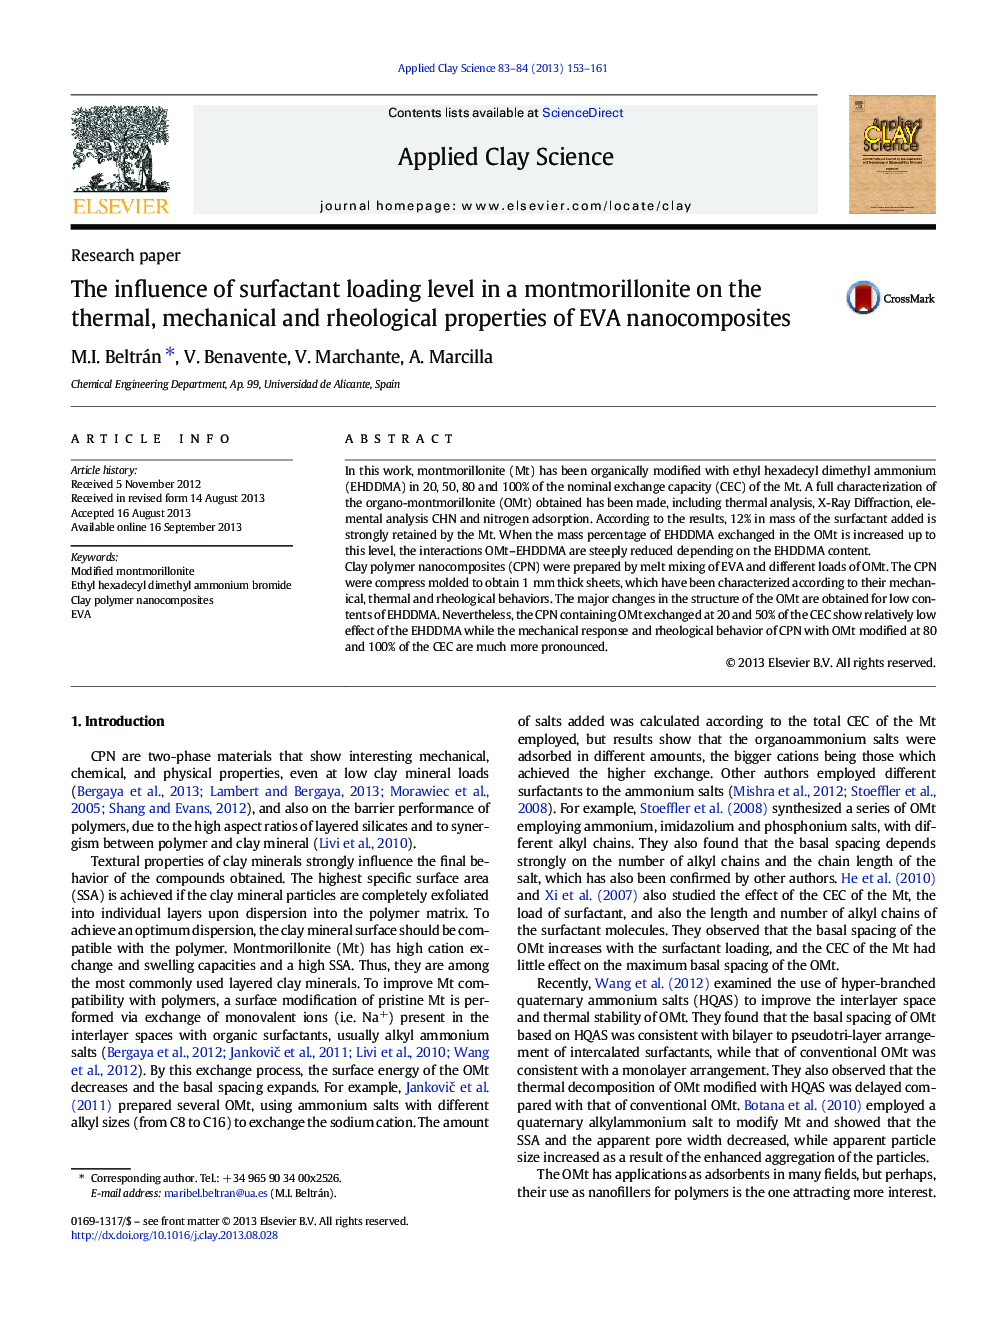 The influence of surfactant loading level in a montmorillonite on the thermal, mechanical and rheological properties of EVA nanocomposites